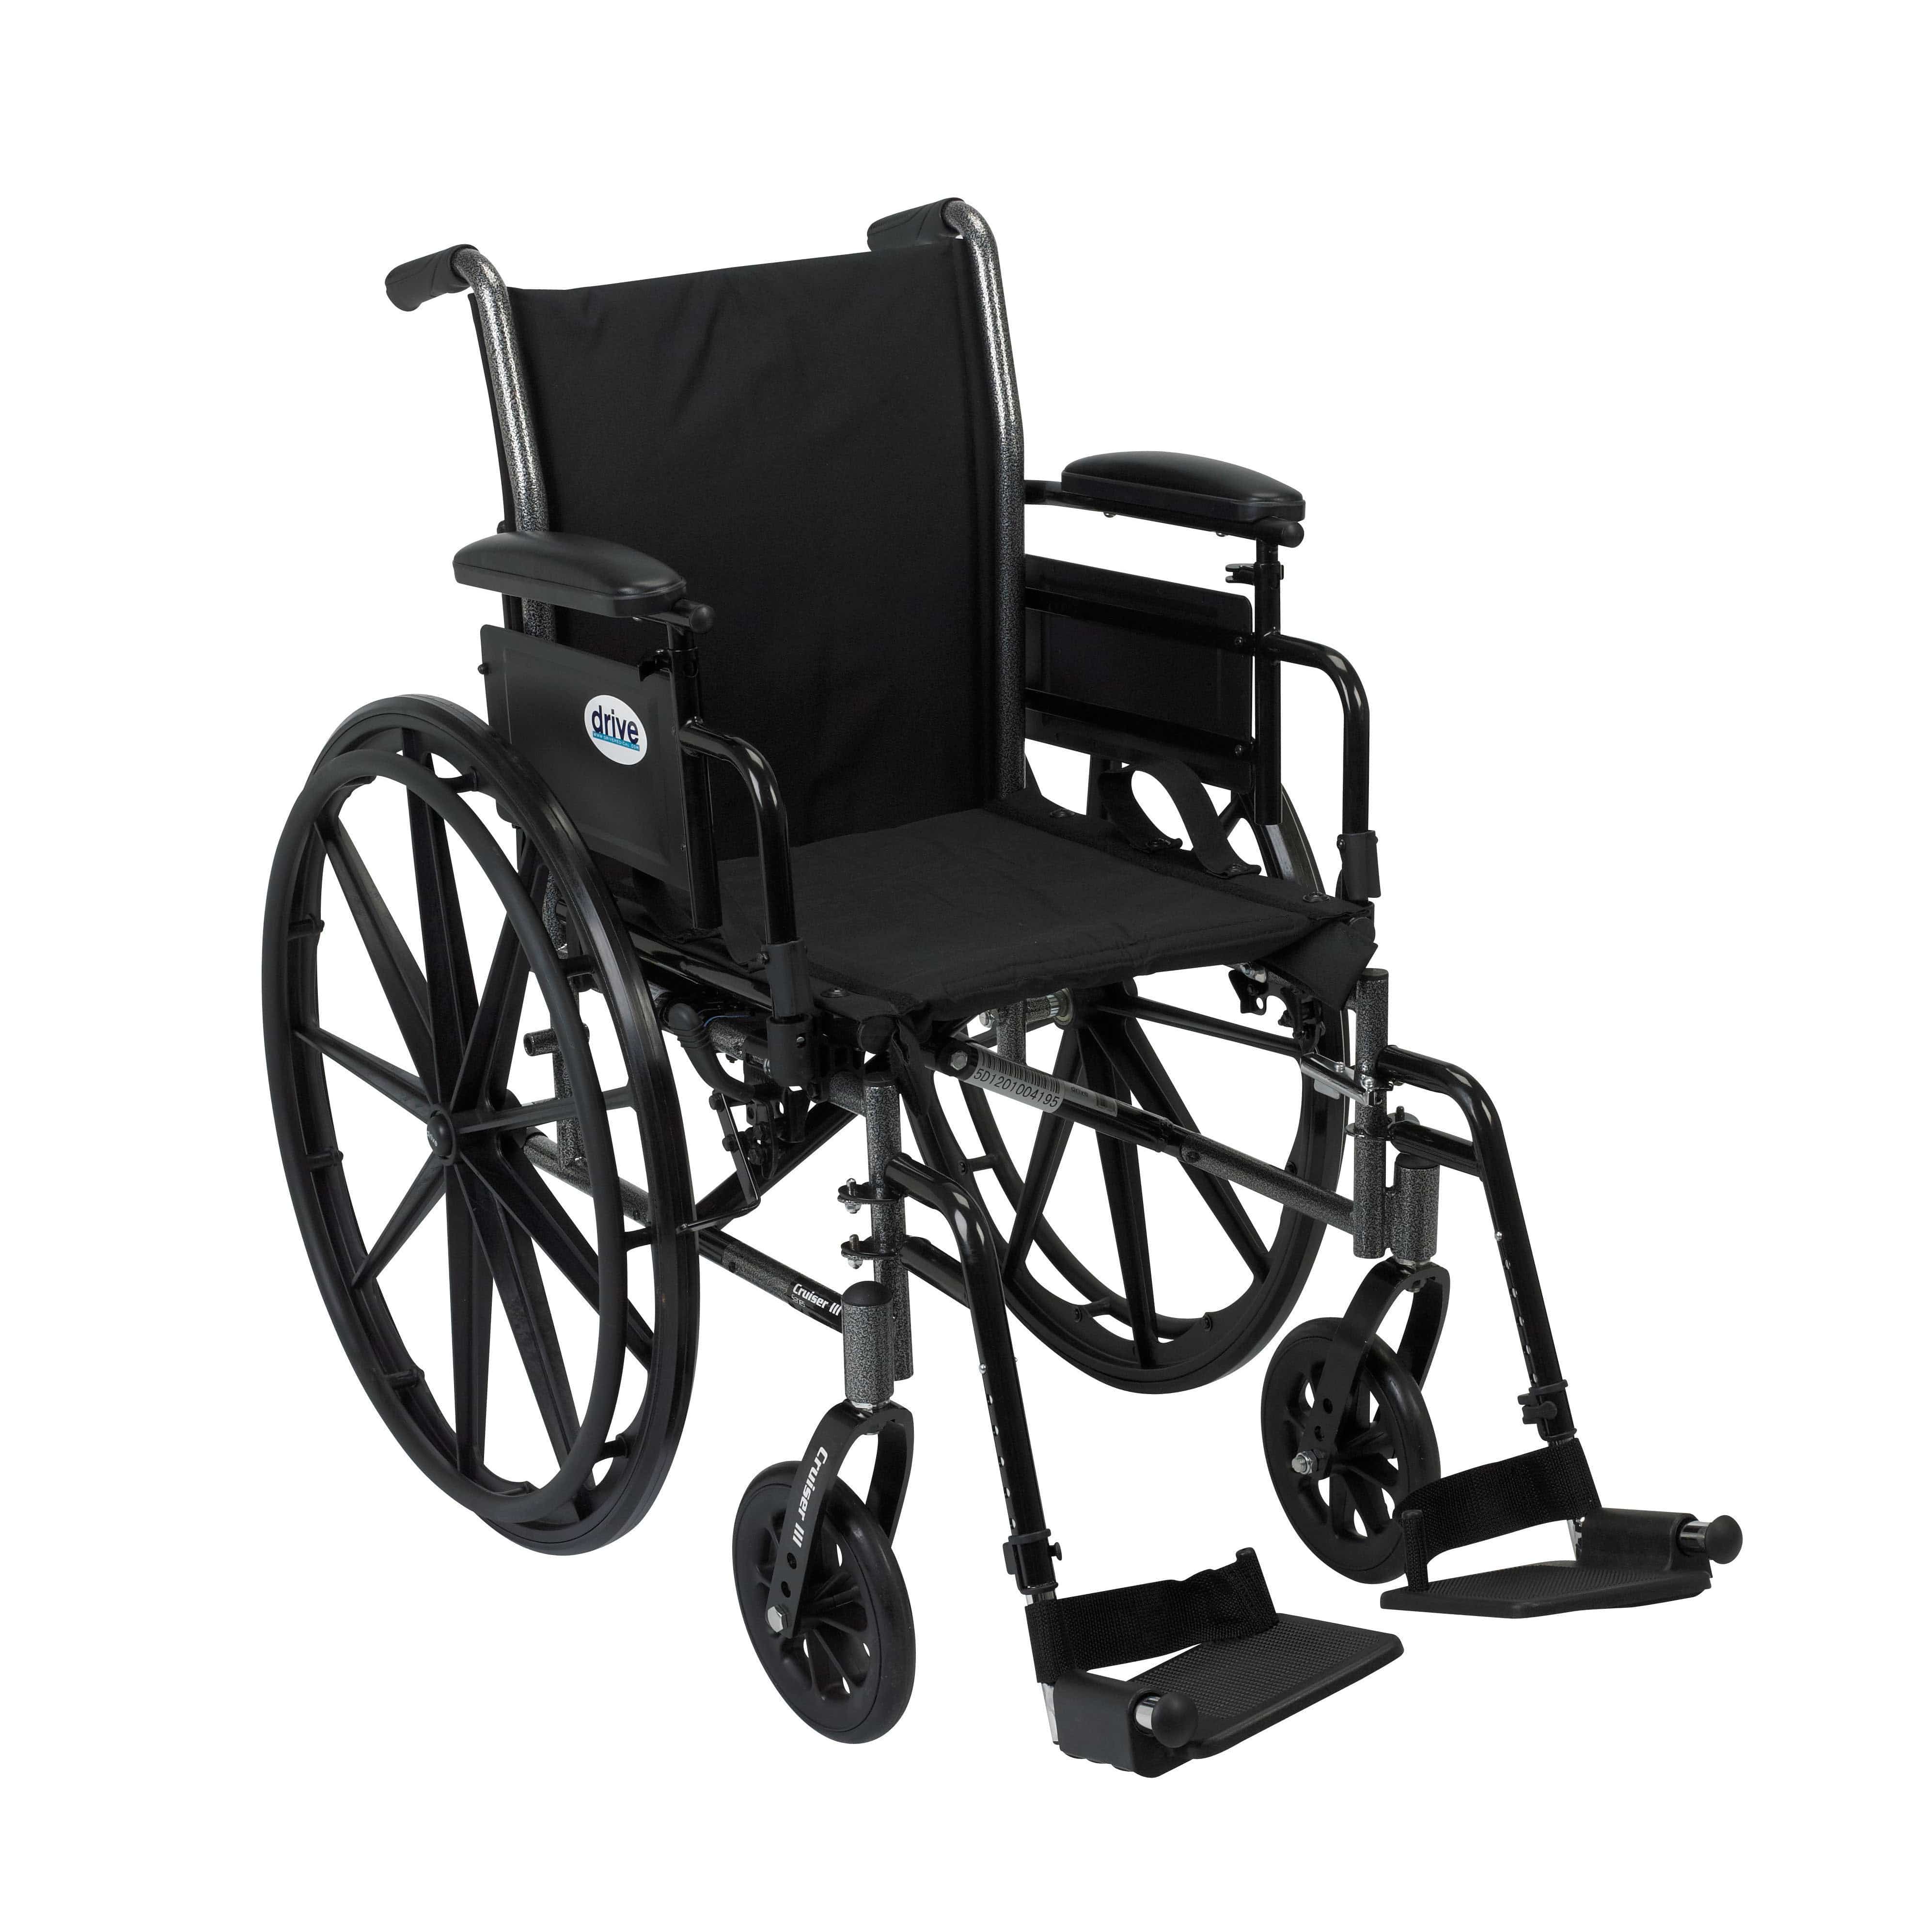 Drive Medical Wheelchairs Flip Back Removable Adjustable Height Desk Arms and Swing away Footrests / 18" Seat Drive Medical Cruiser III Light Weight Wheelchair with Flip Back Removable Arms